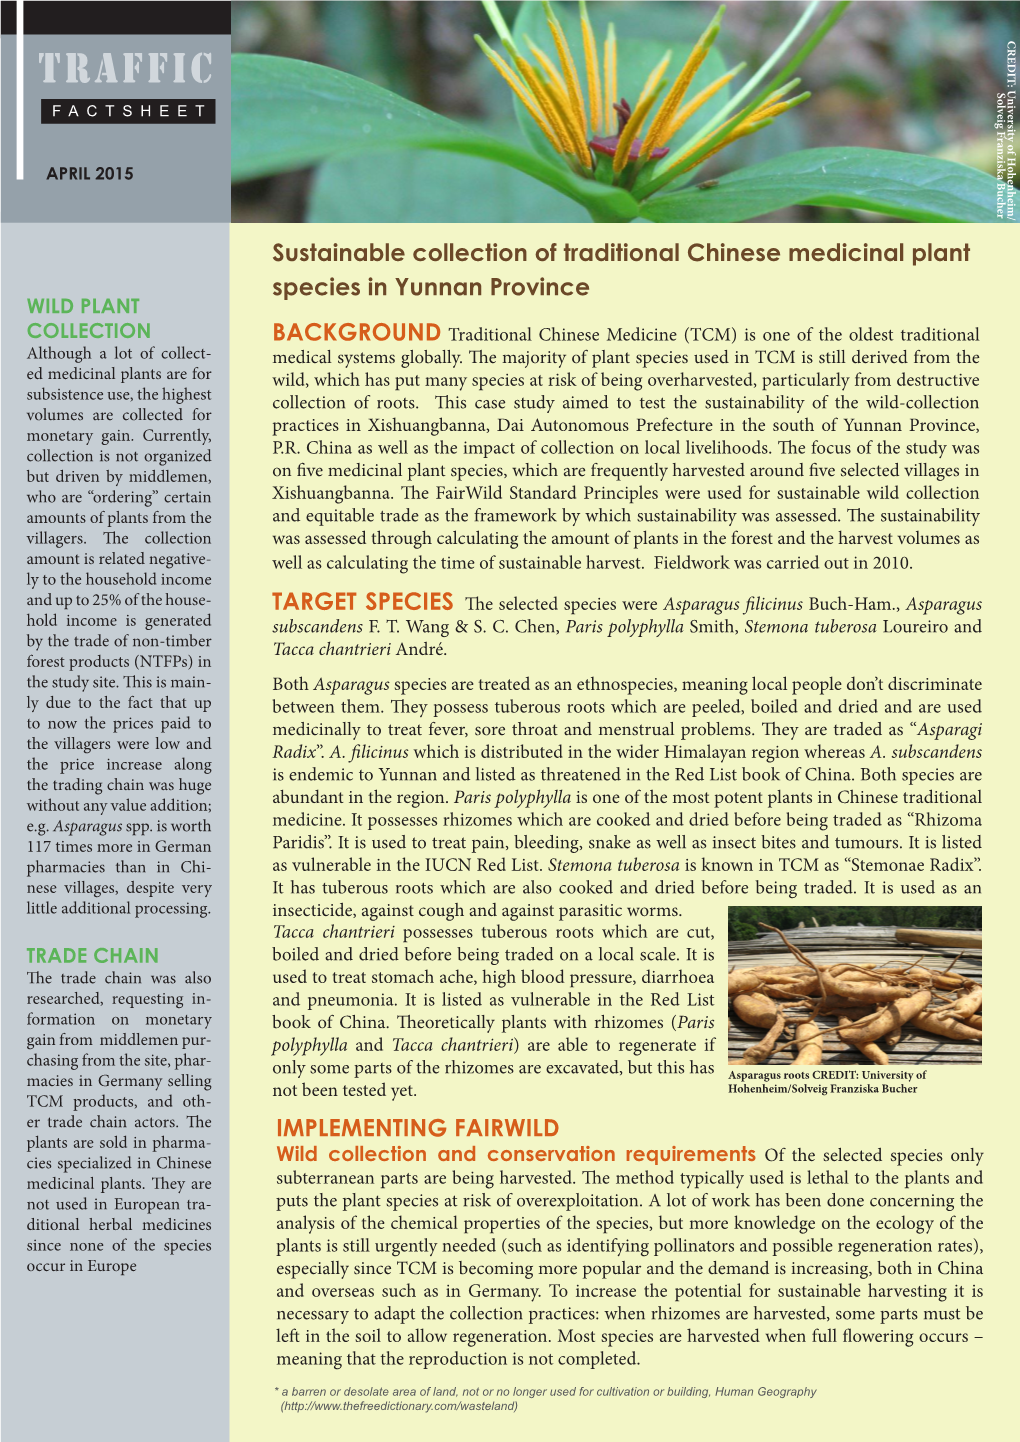 Case Study 2: Yunnan Province Sustainable Collection of TCM Spp (PDF, 910